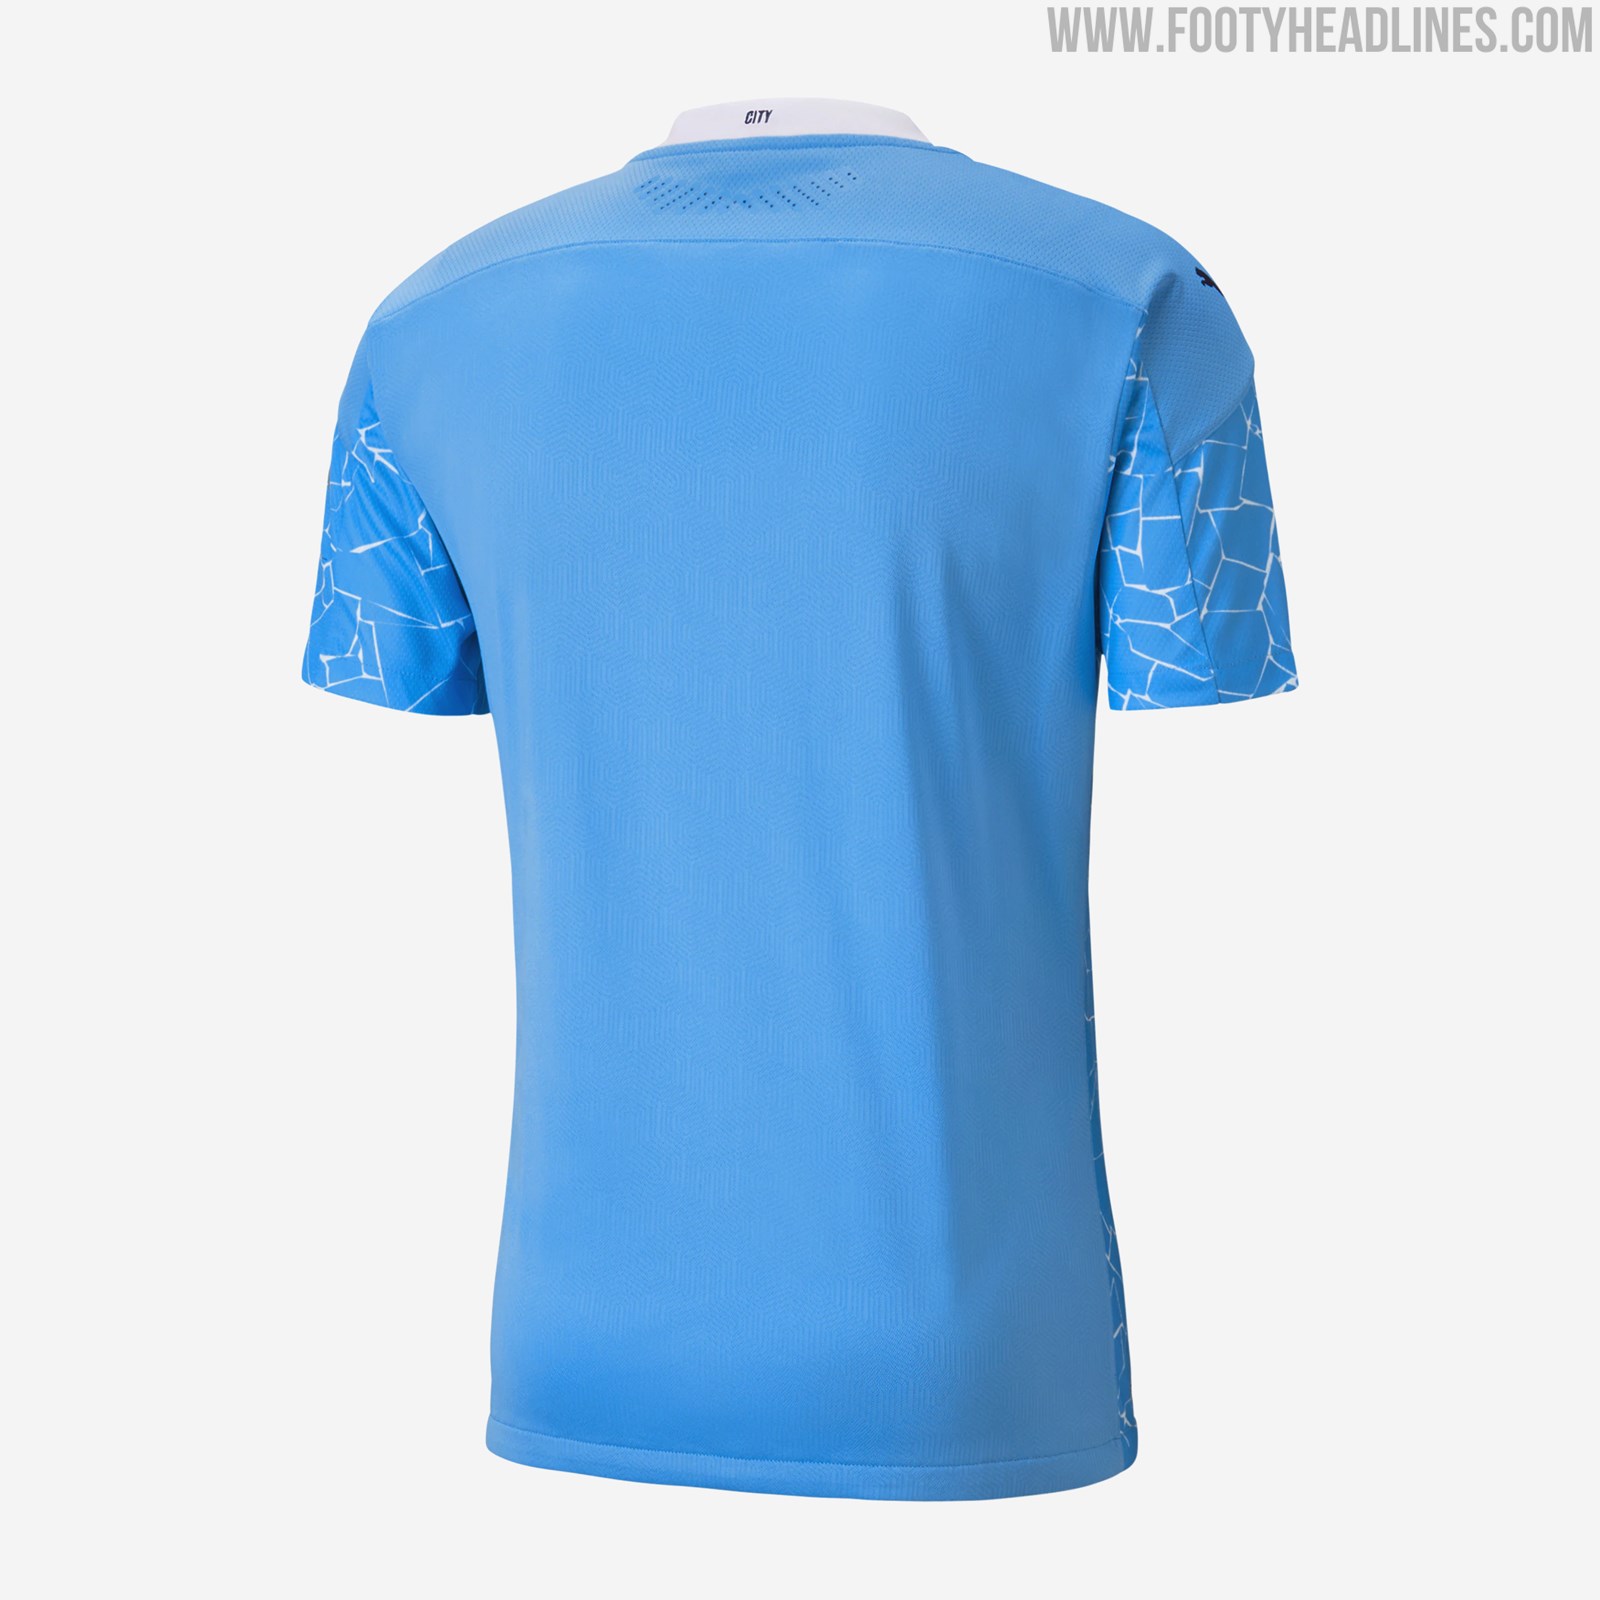 Manchester City 20-21 Home Kit Released - Footy Headlines